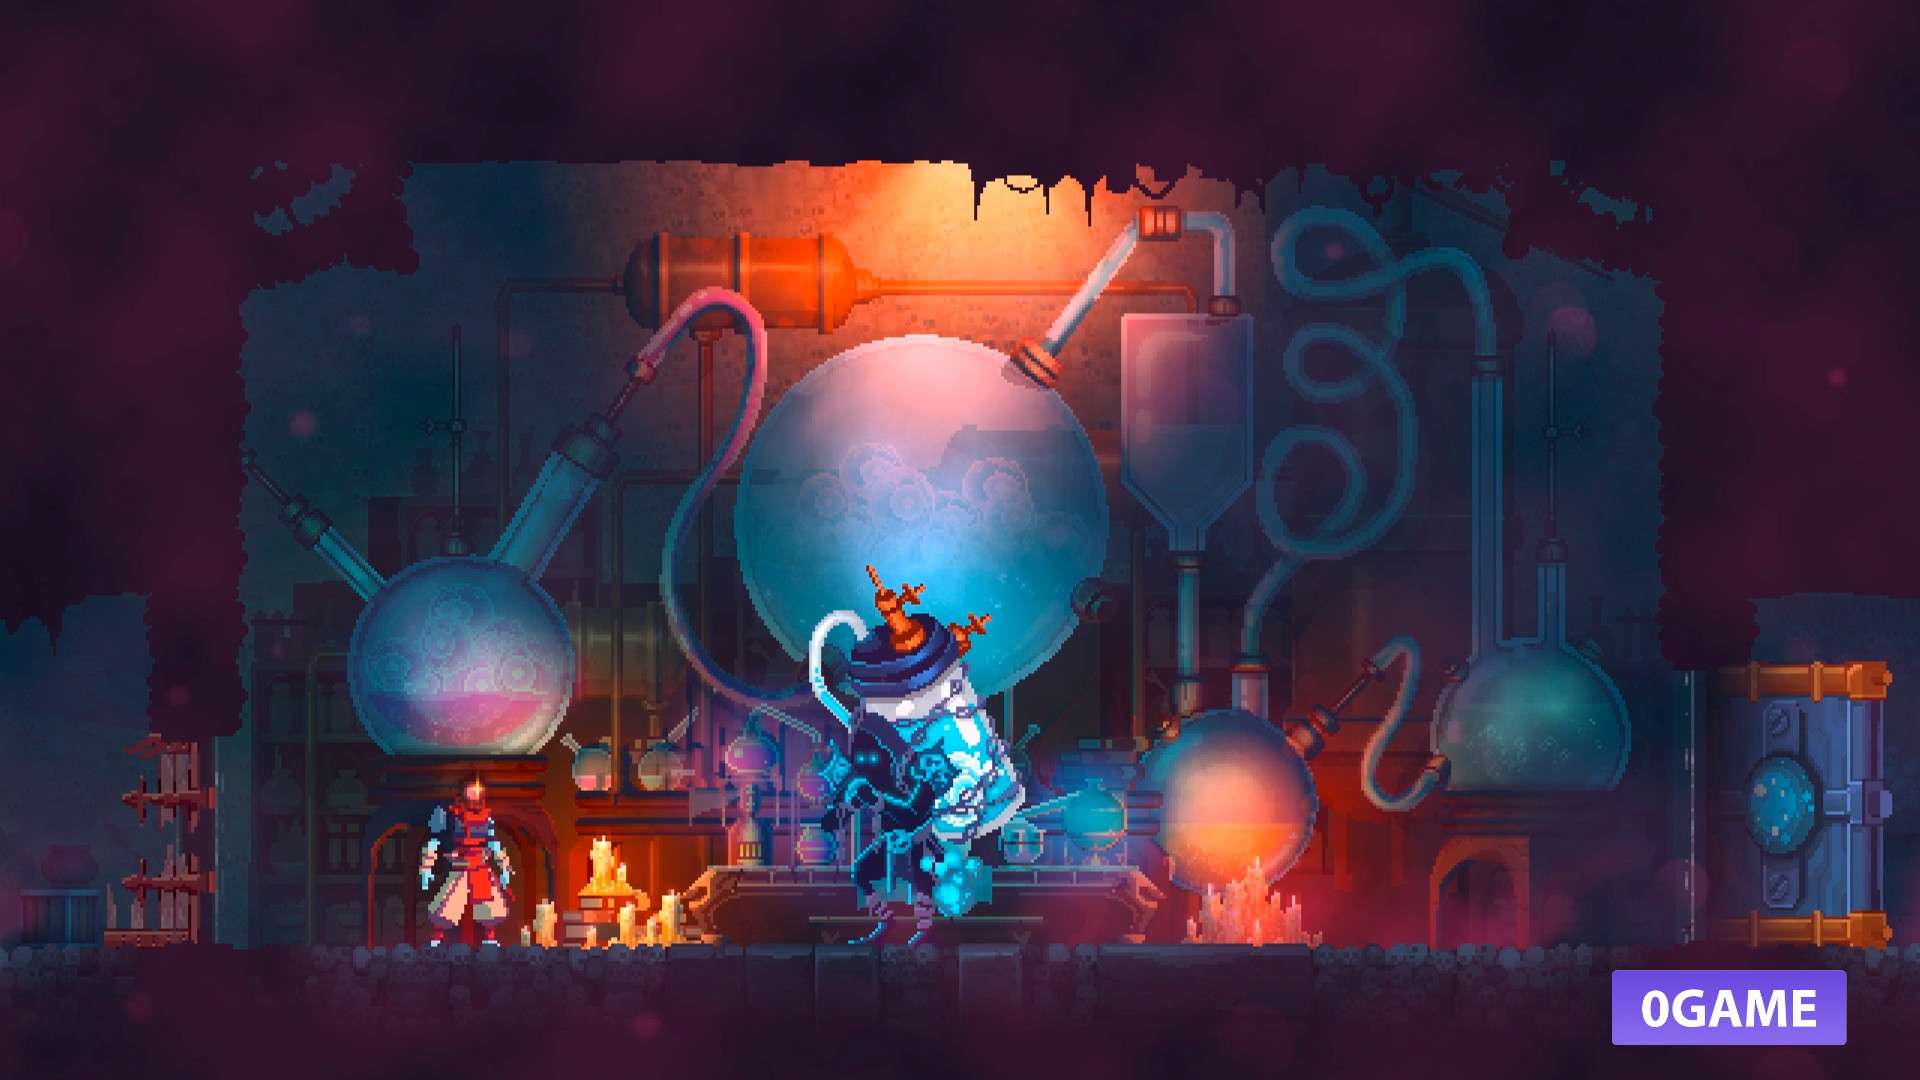 free for apple download Dead Cells